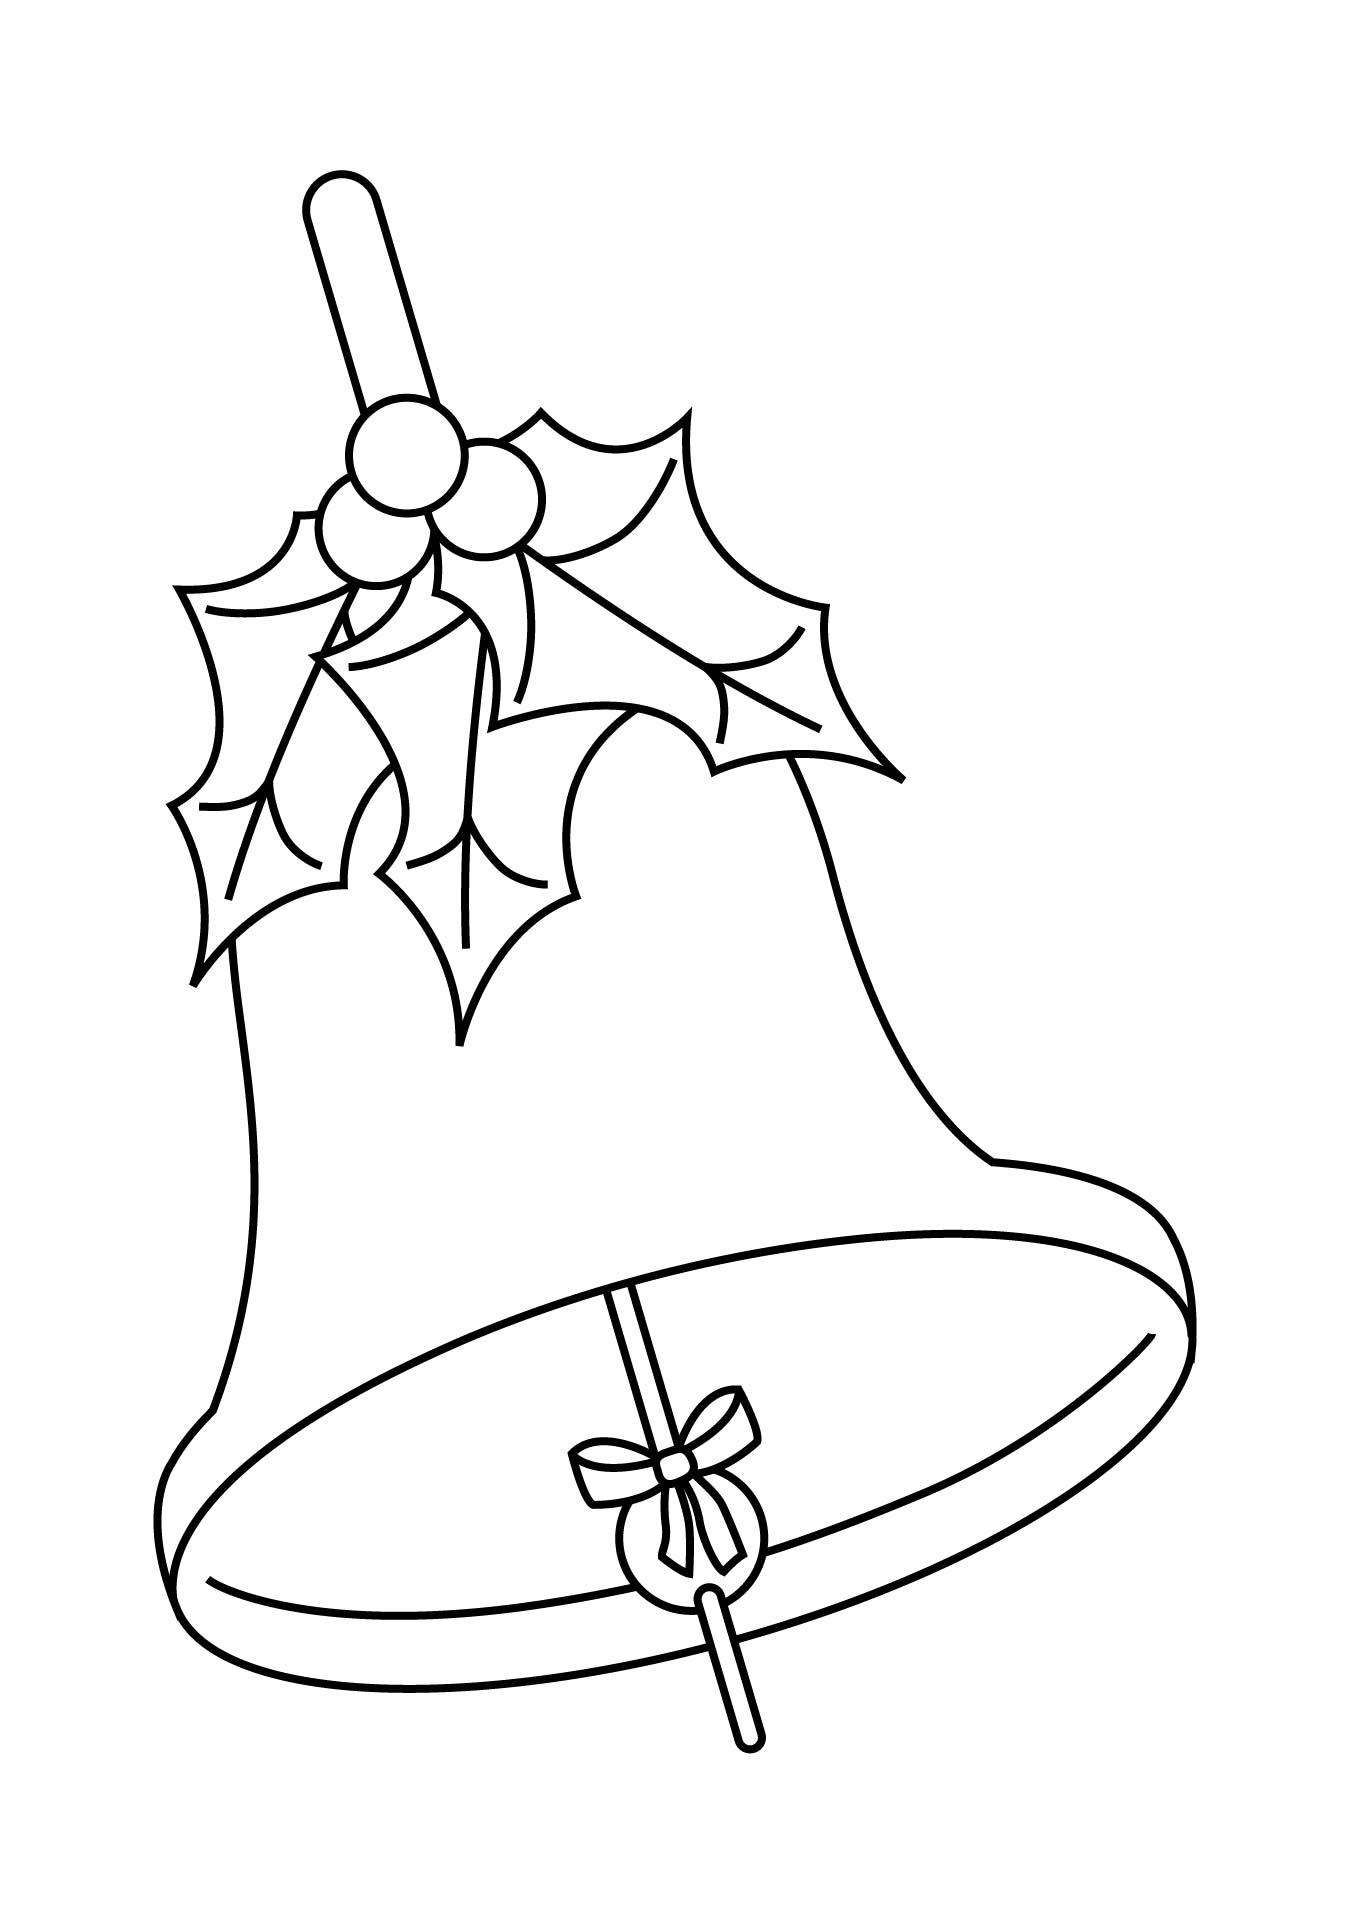 Printable Bell Template With Bow